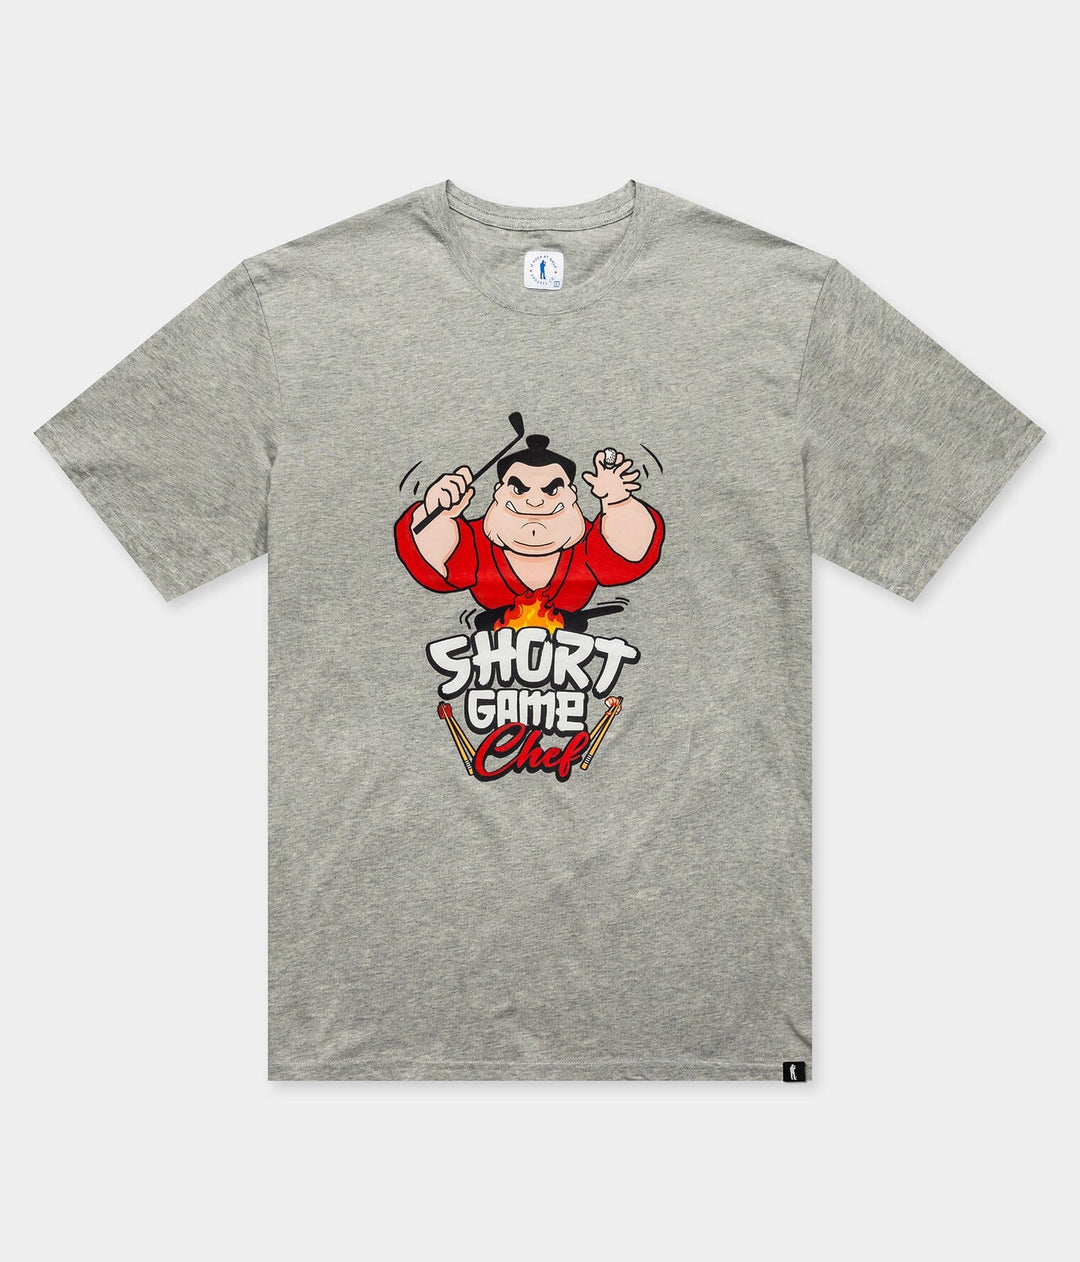 Short Game Chef Tee